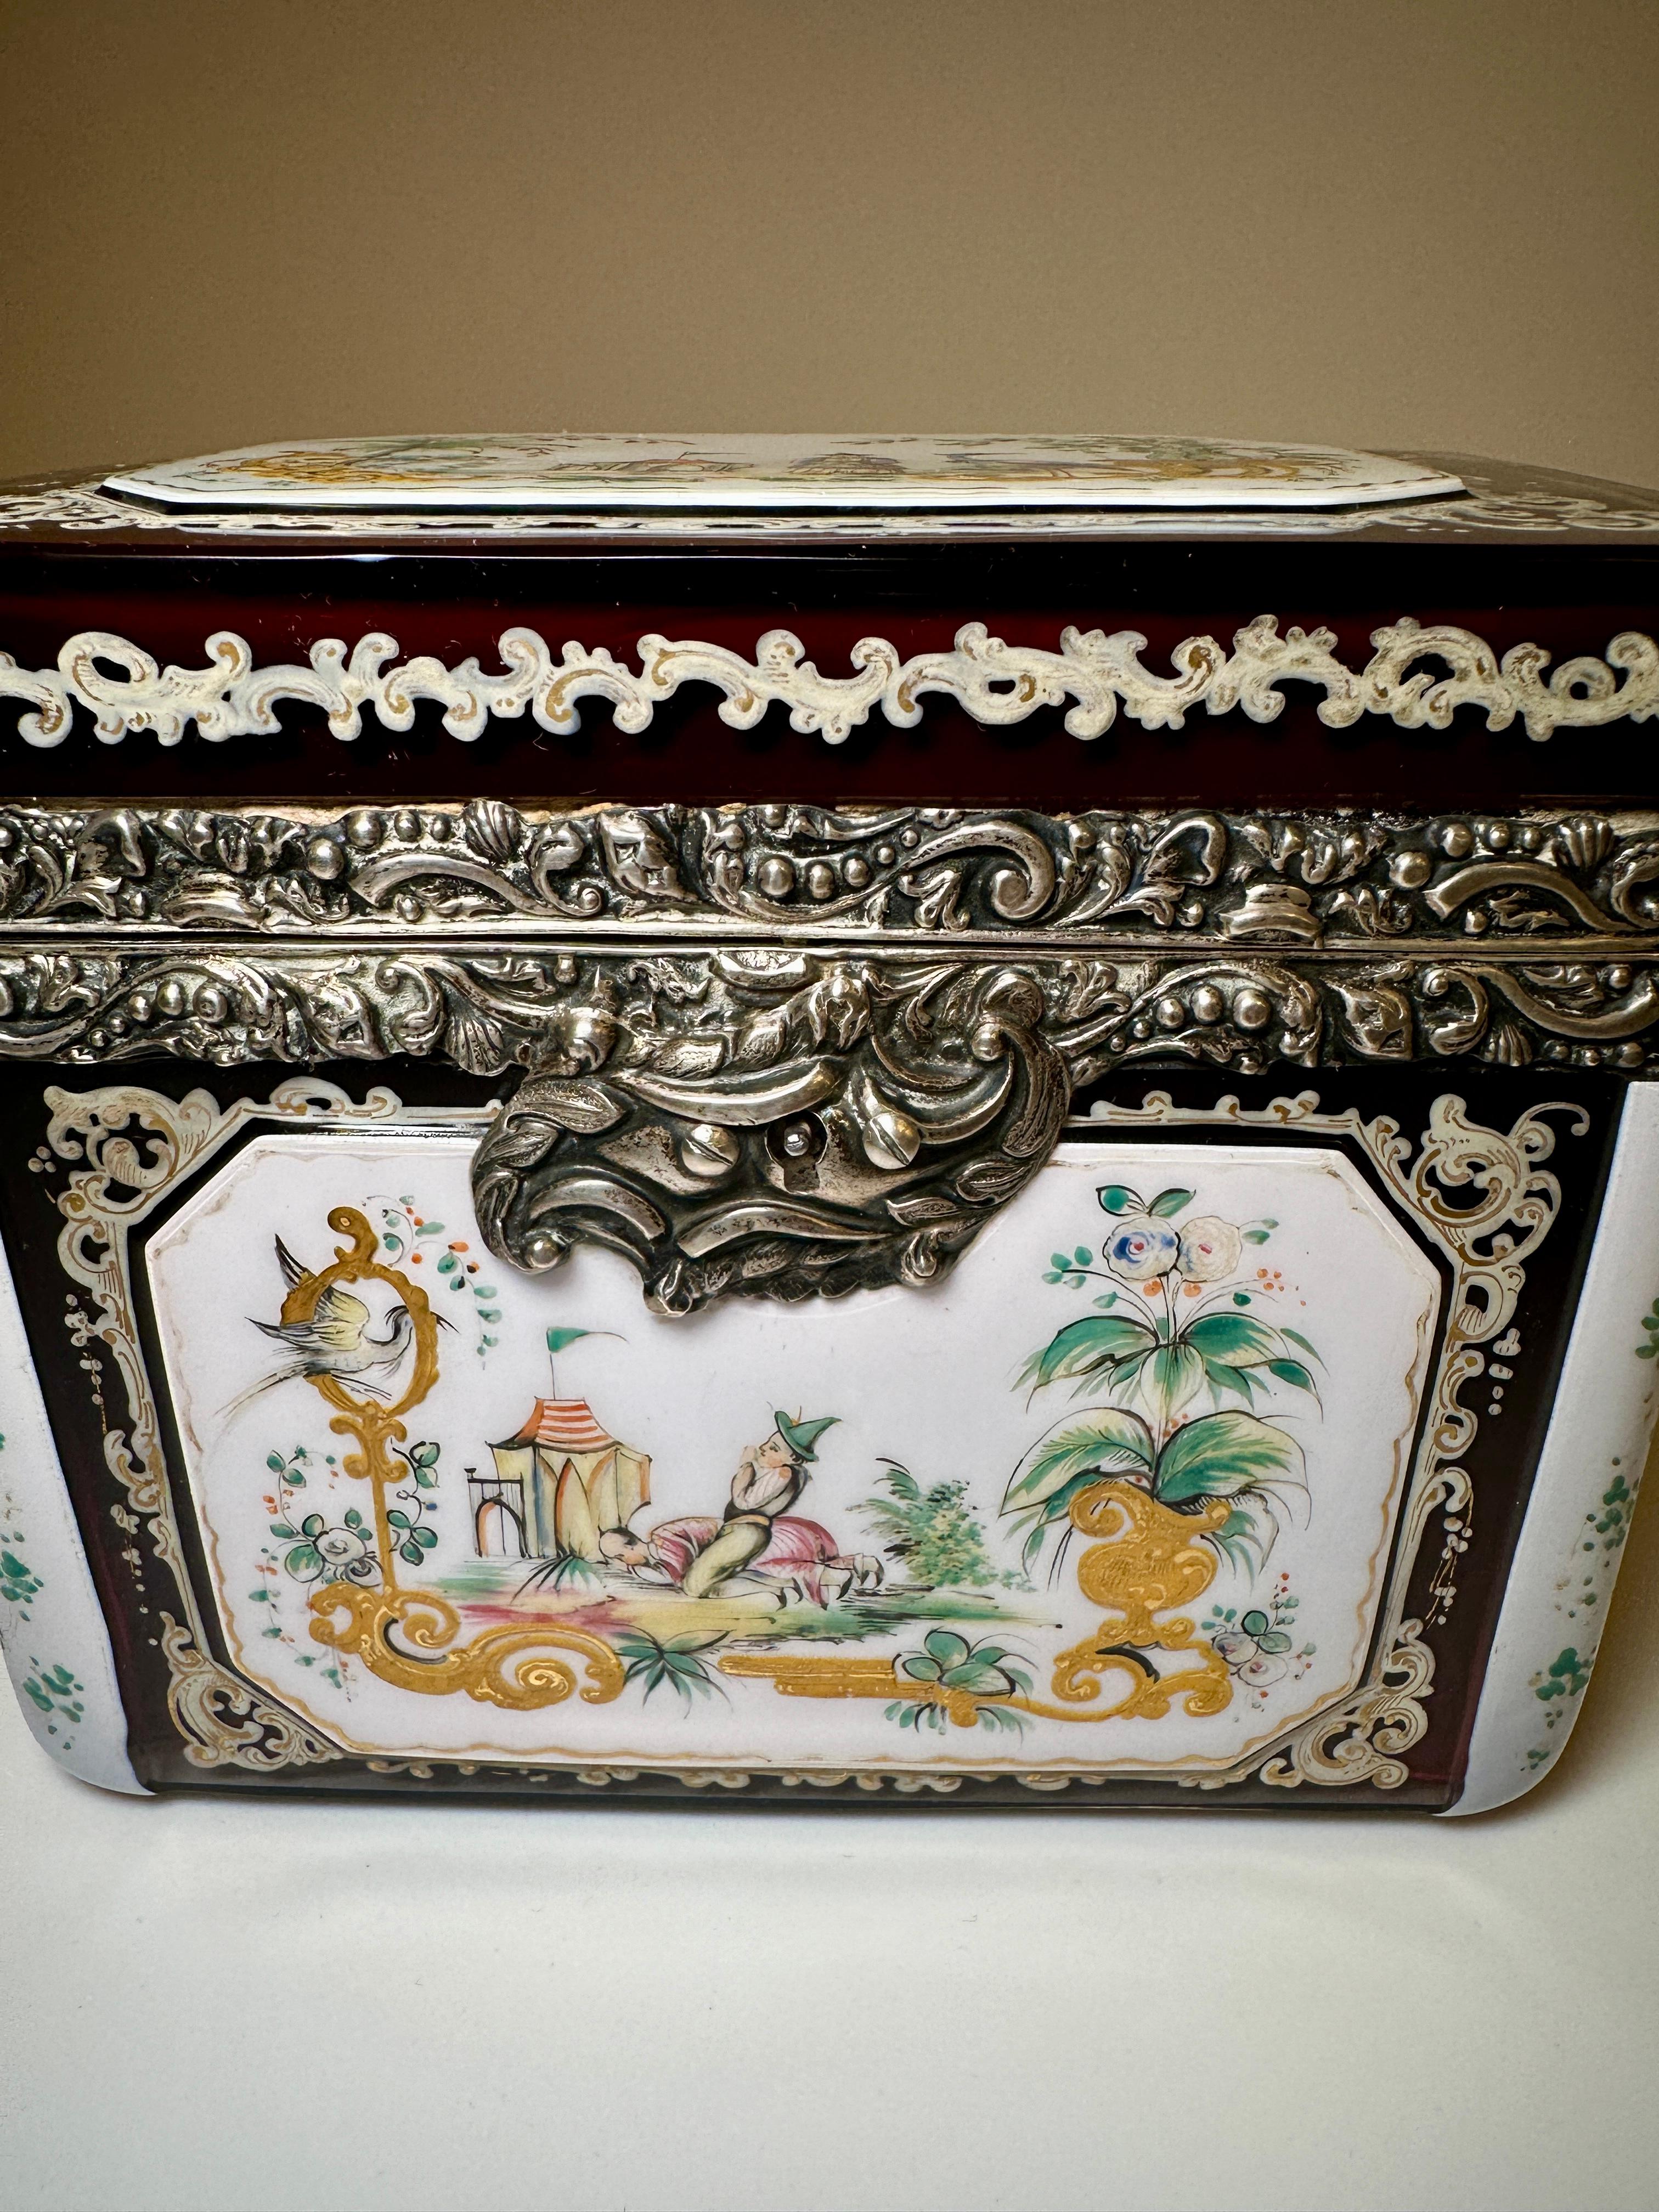 Bohemian Silver-Mounted Overlay and Enameled Box, Dated 1852 For Sale 1